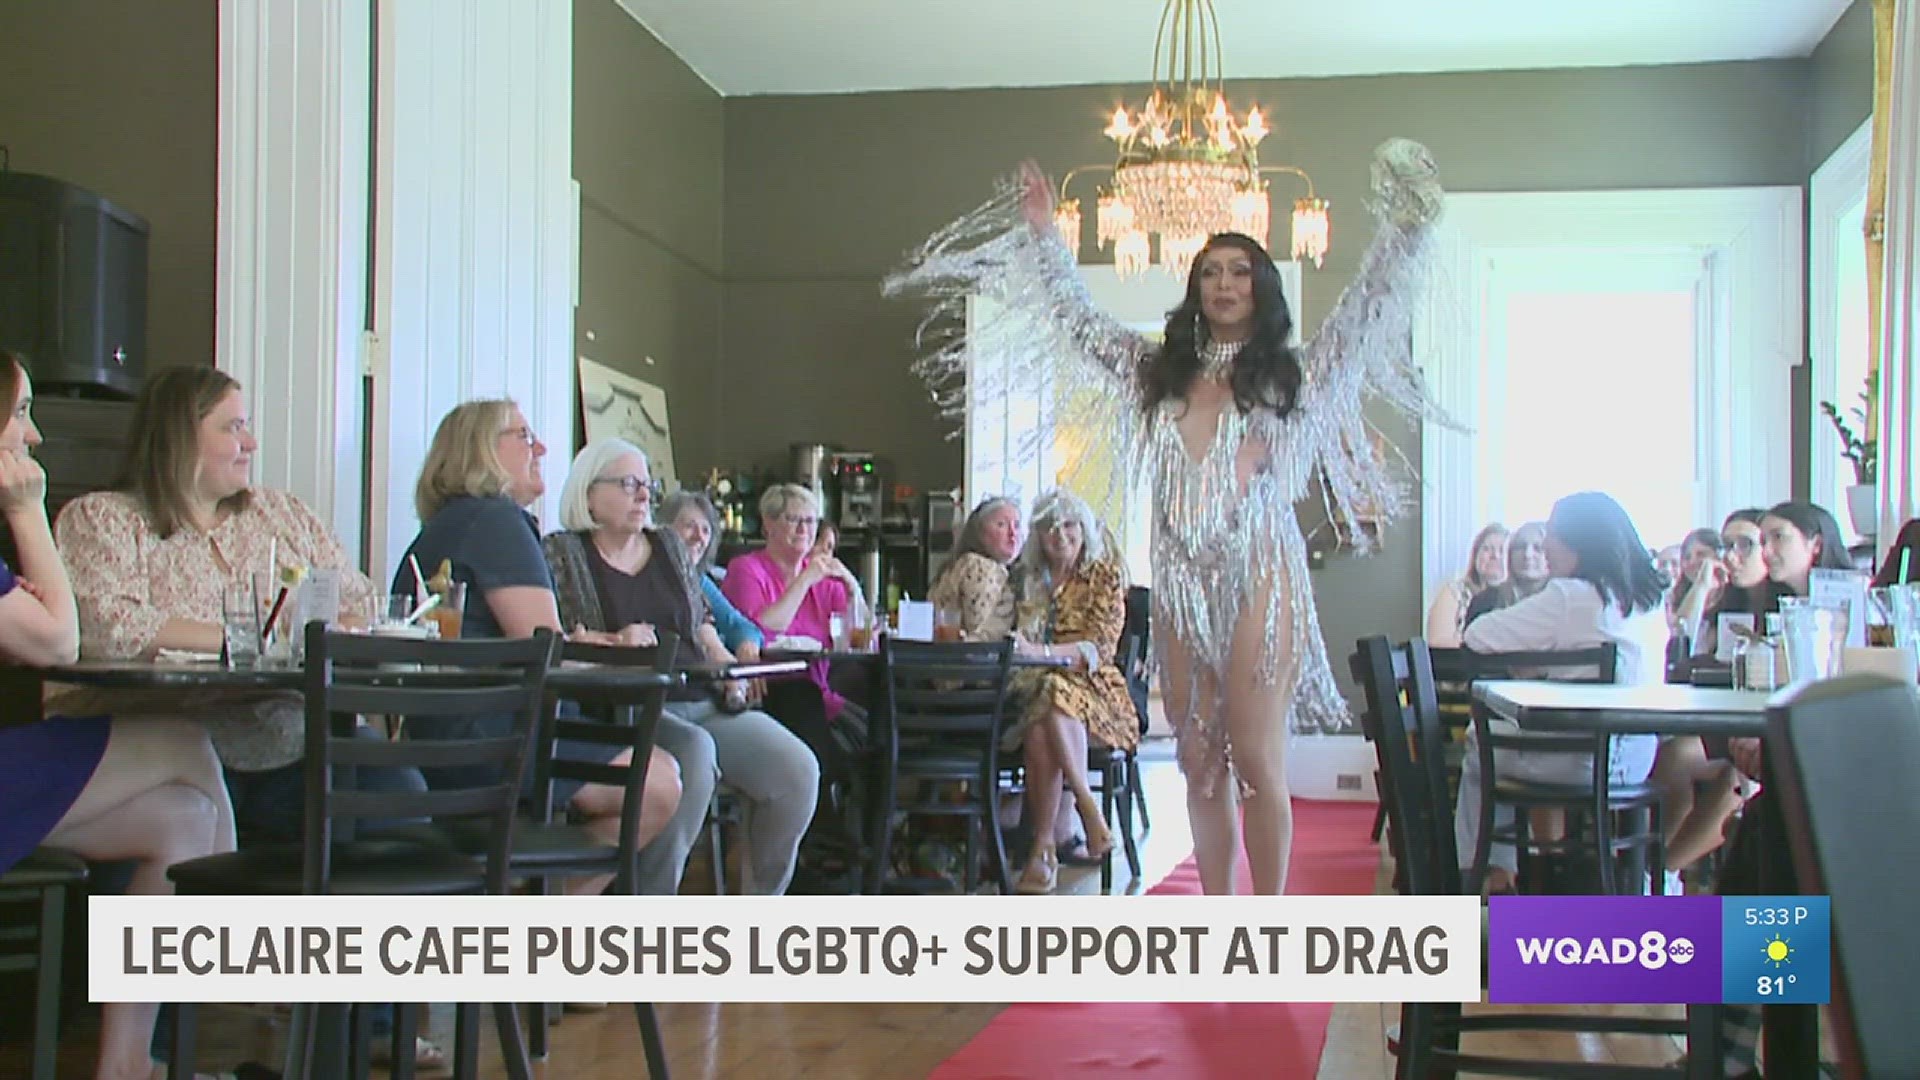 The café hosts drag brunch on the third Sunday of every month.